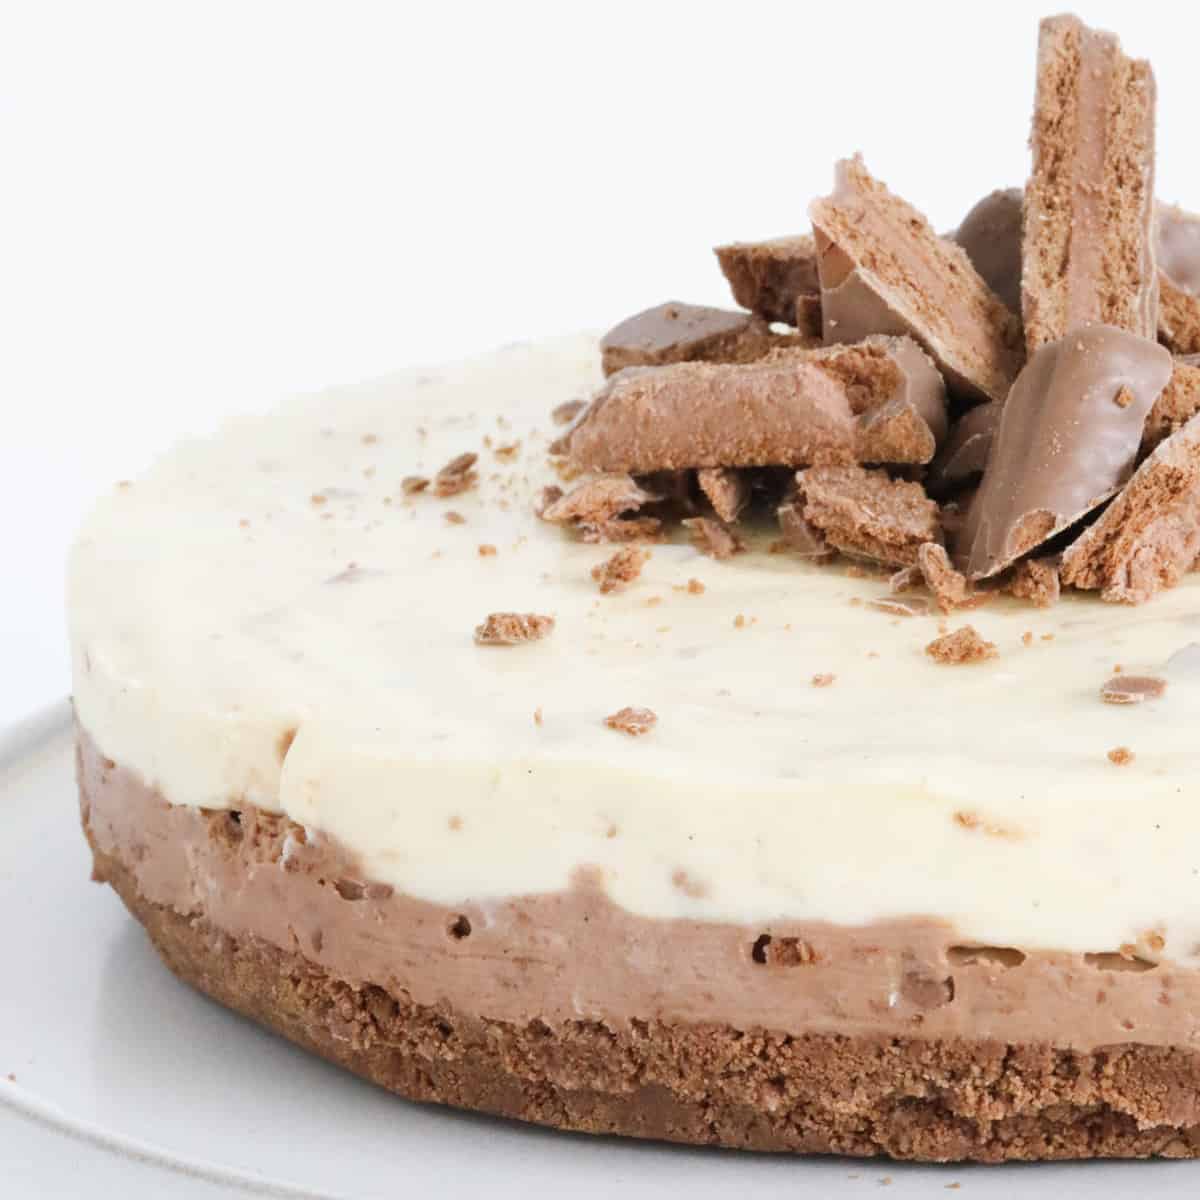 A close up view of a double layered cheesecake with chocolate biscuits on top.